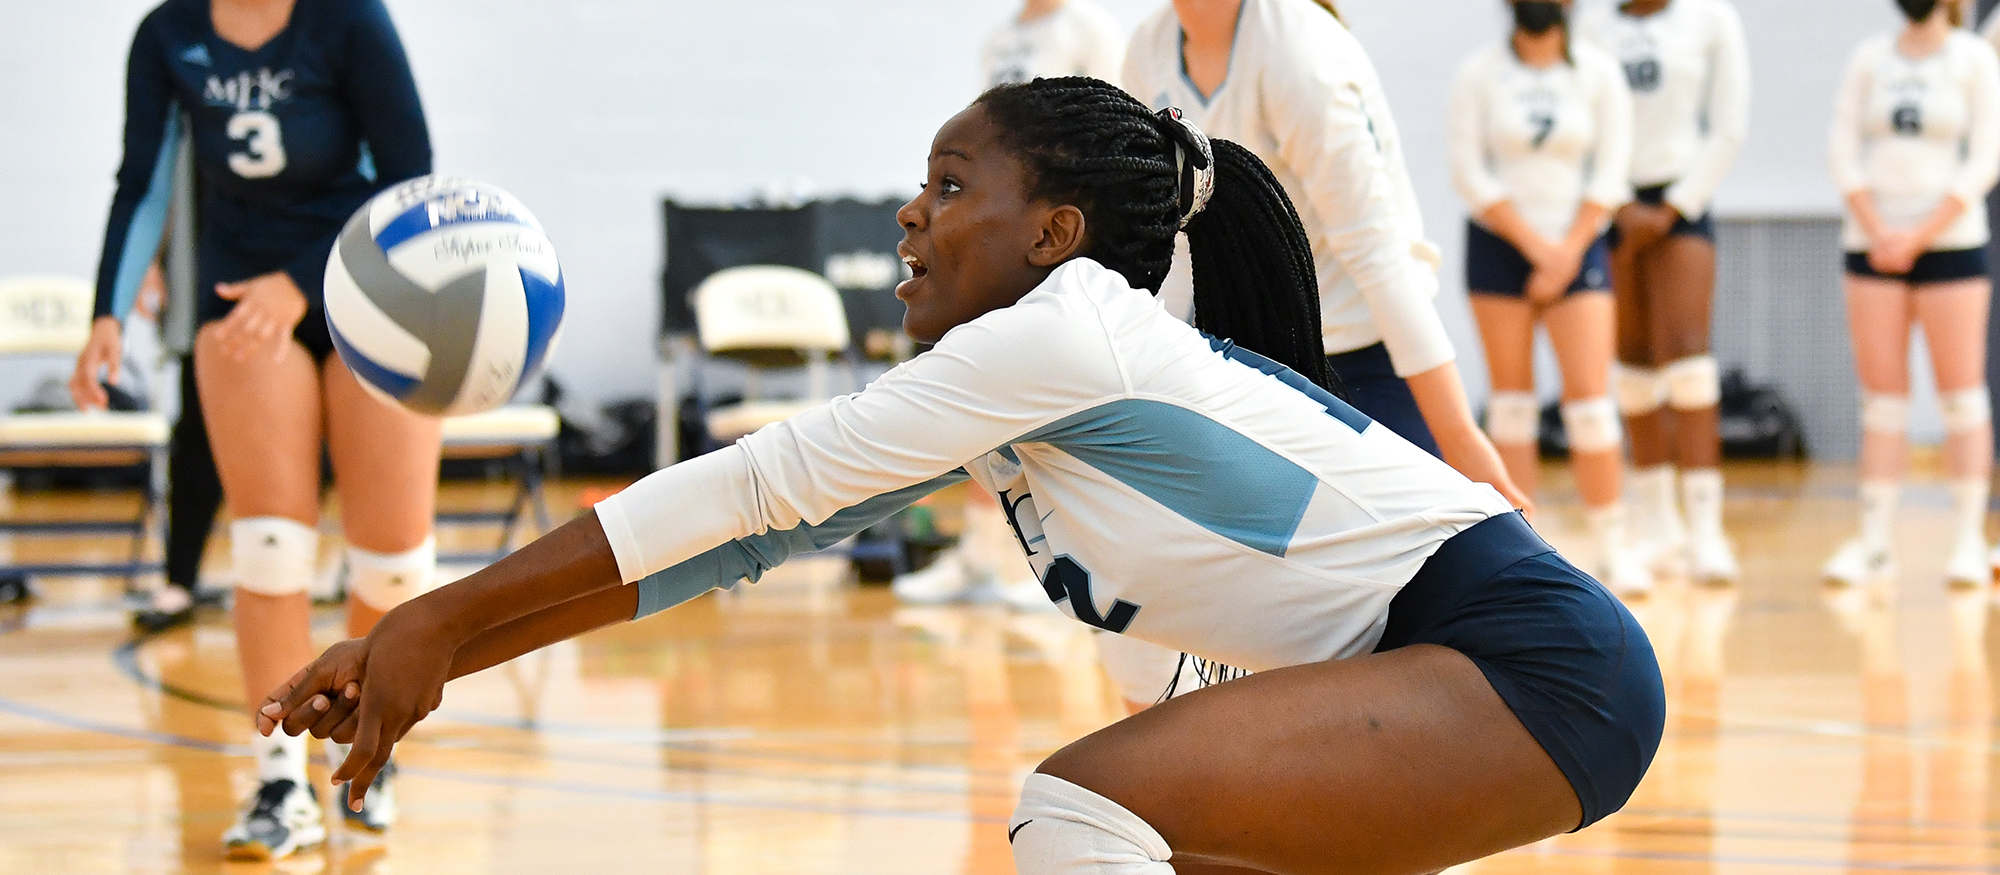 Senior Marion Abeja gave a strong all-around performance, including 33 assists, in her debut as Mount Holyoke's starting setter as the Lyons won 3-2 at the University of St. Joseph in their season opener on Sept. 3, 2022. (RJB Sports file photo)